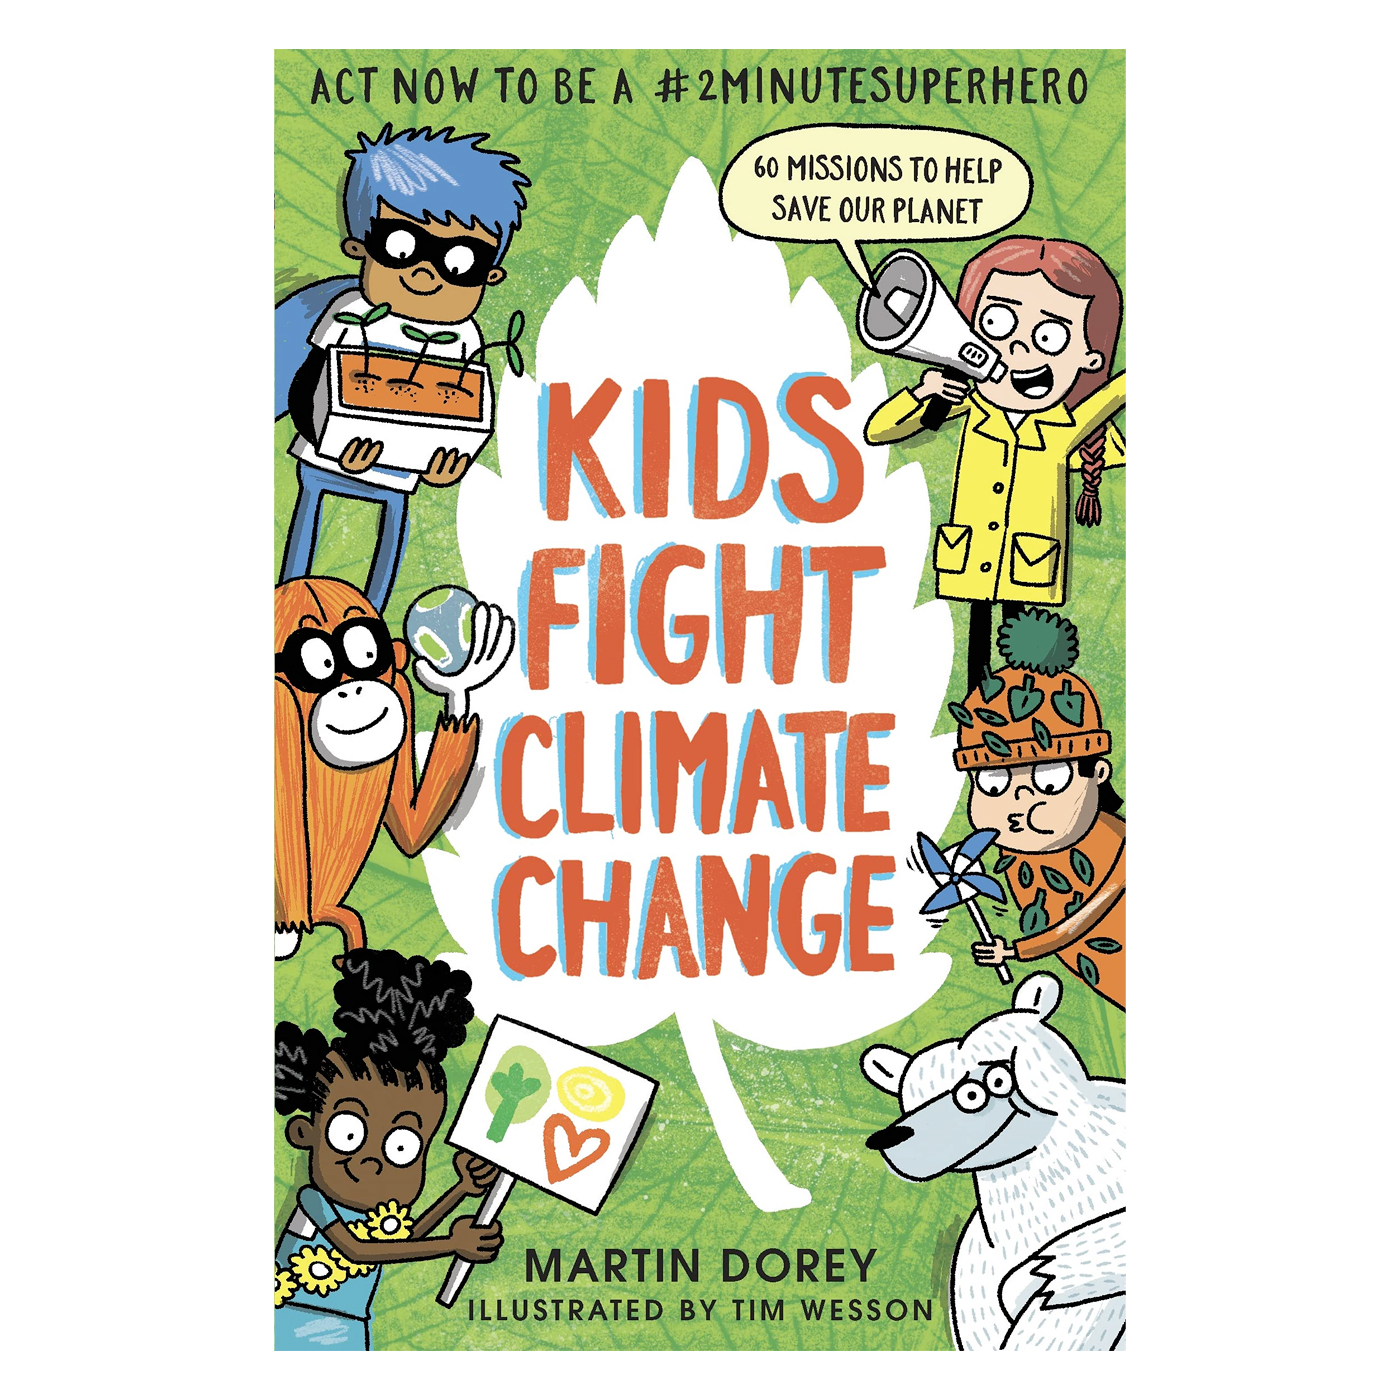  Kids Fight Climate Change